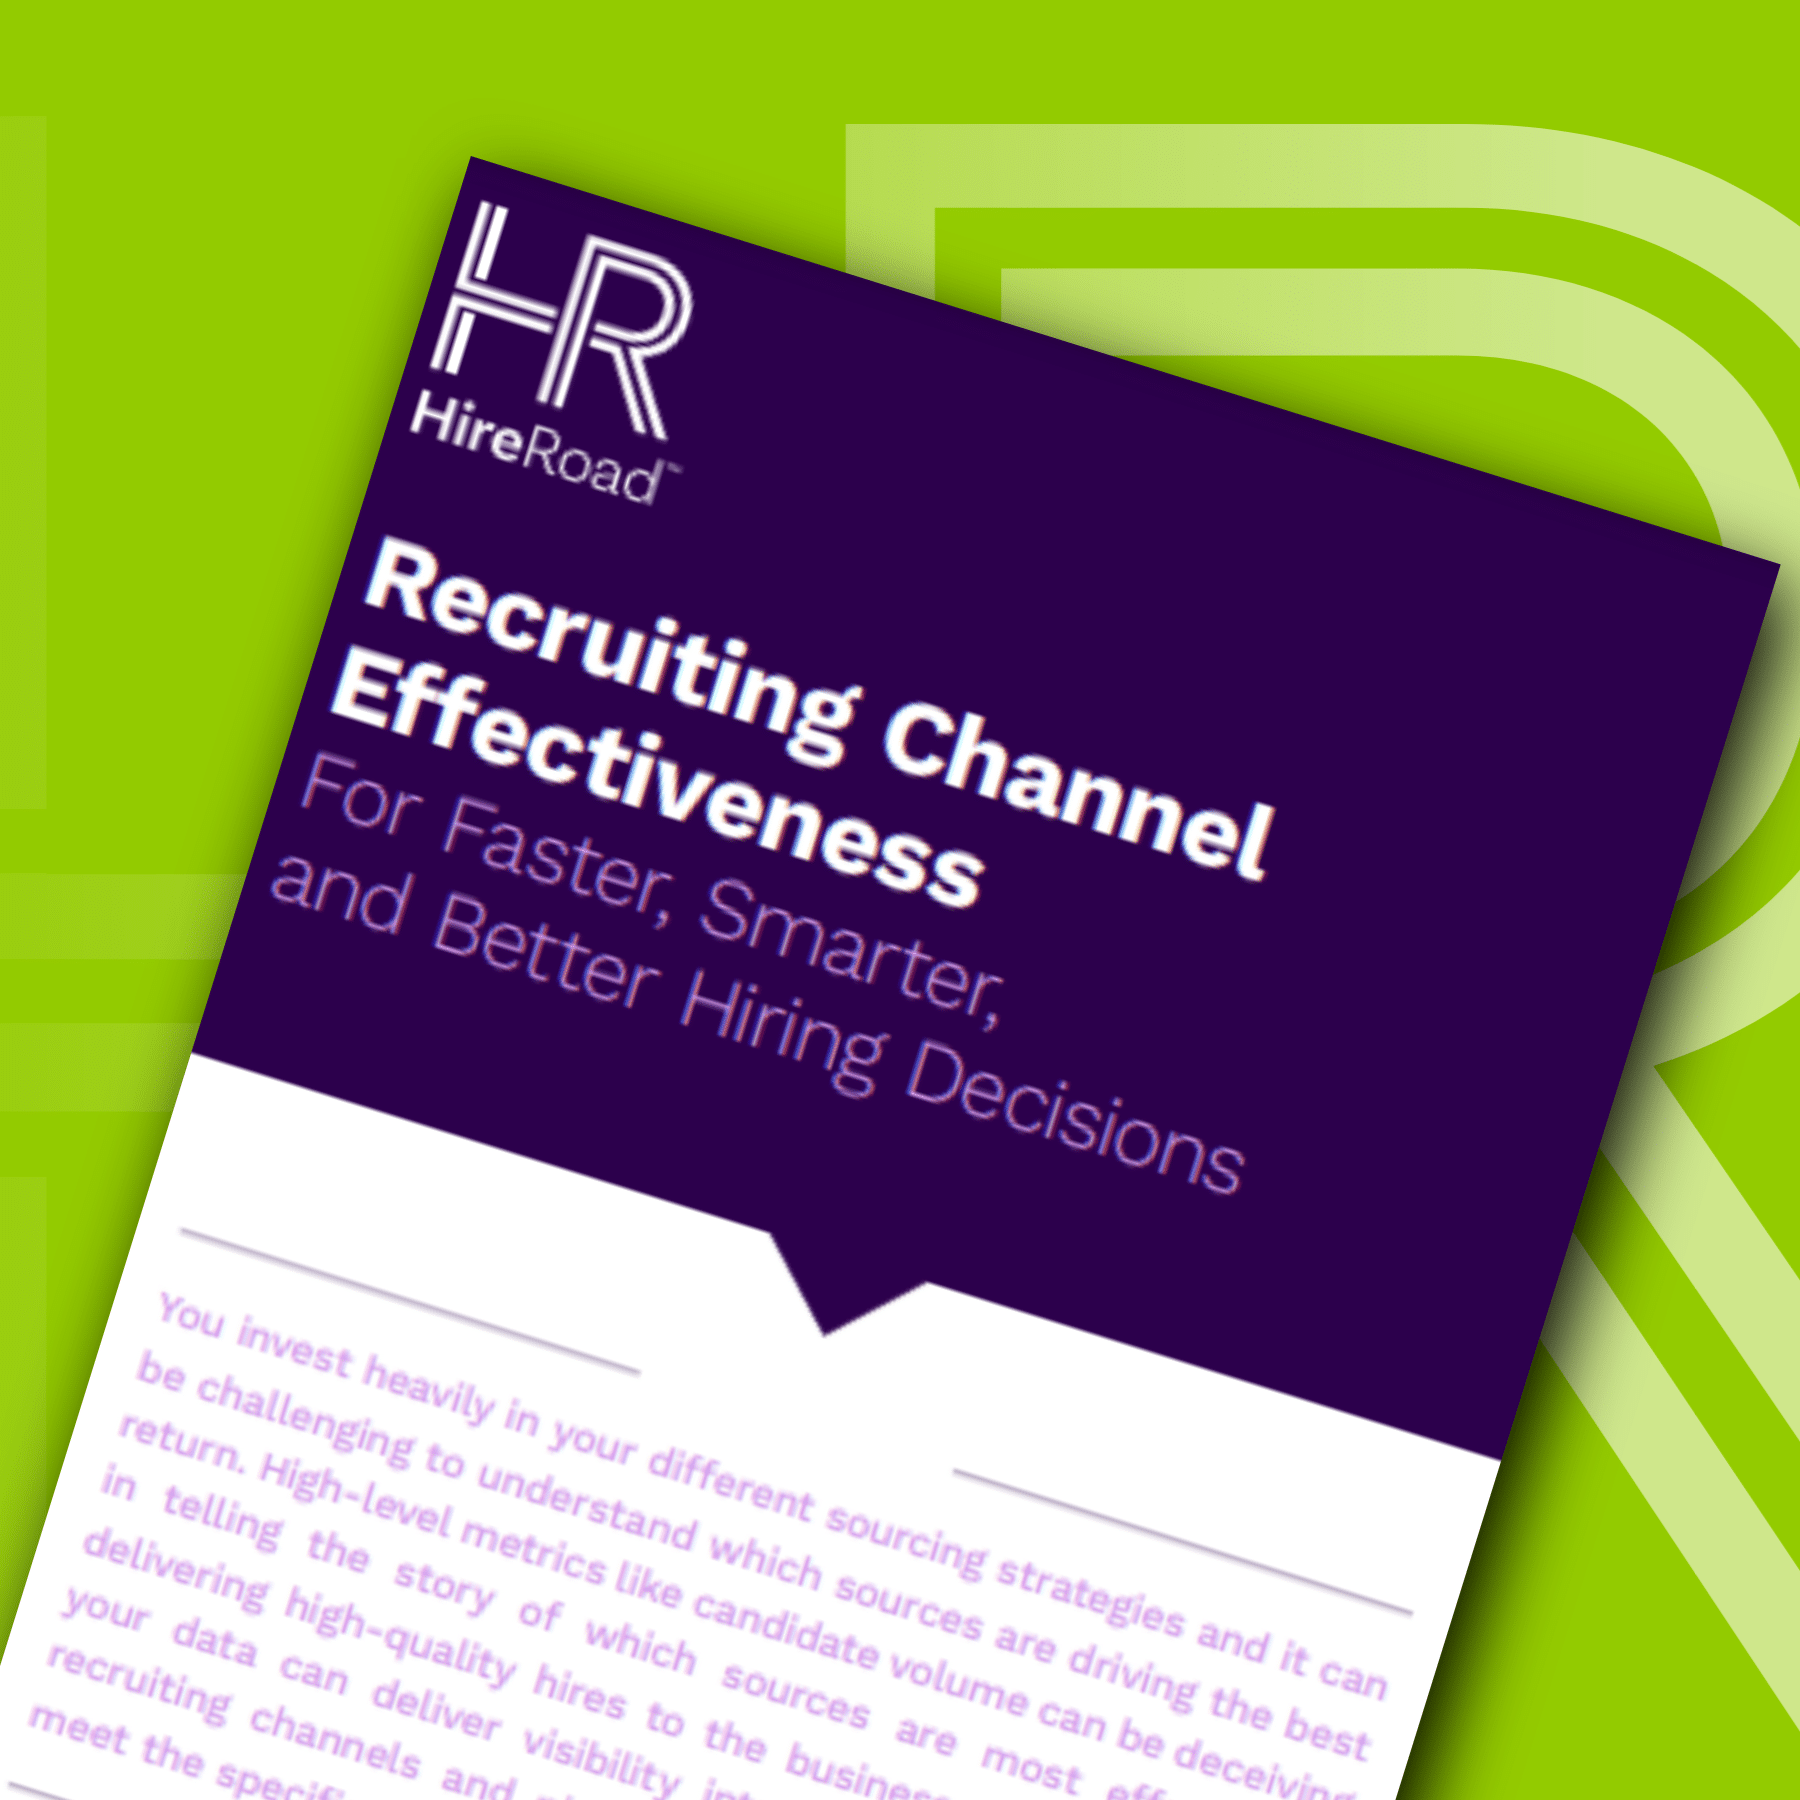 Recruiting Channel Effectiveness Infographic Thumbnail